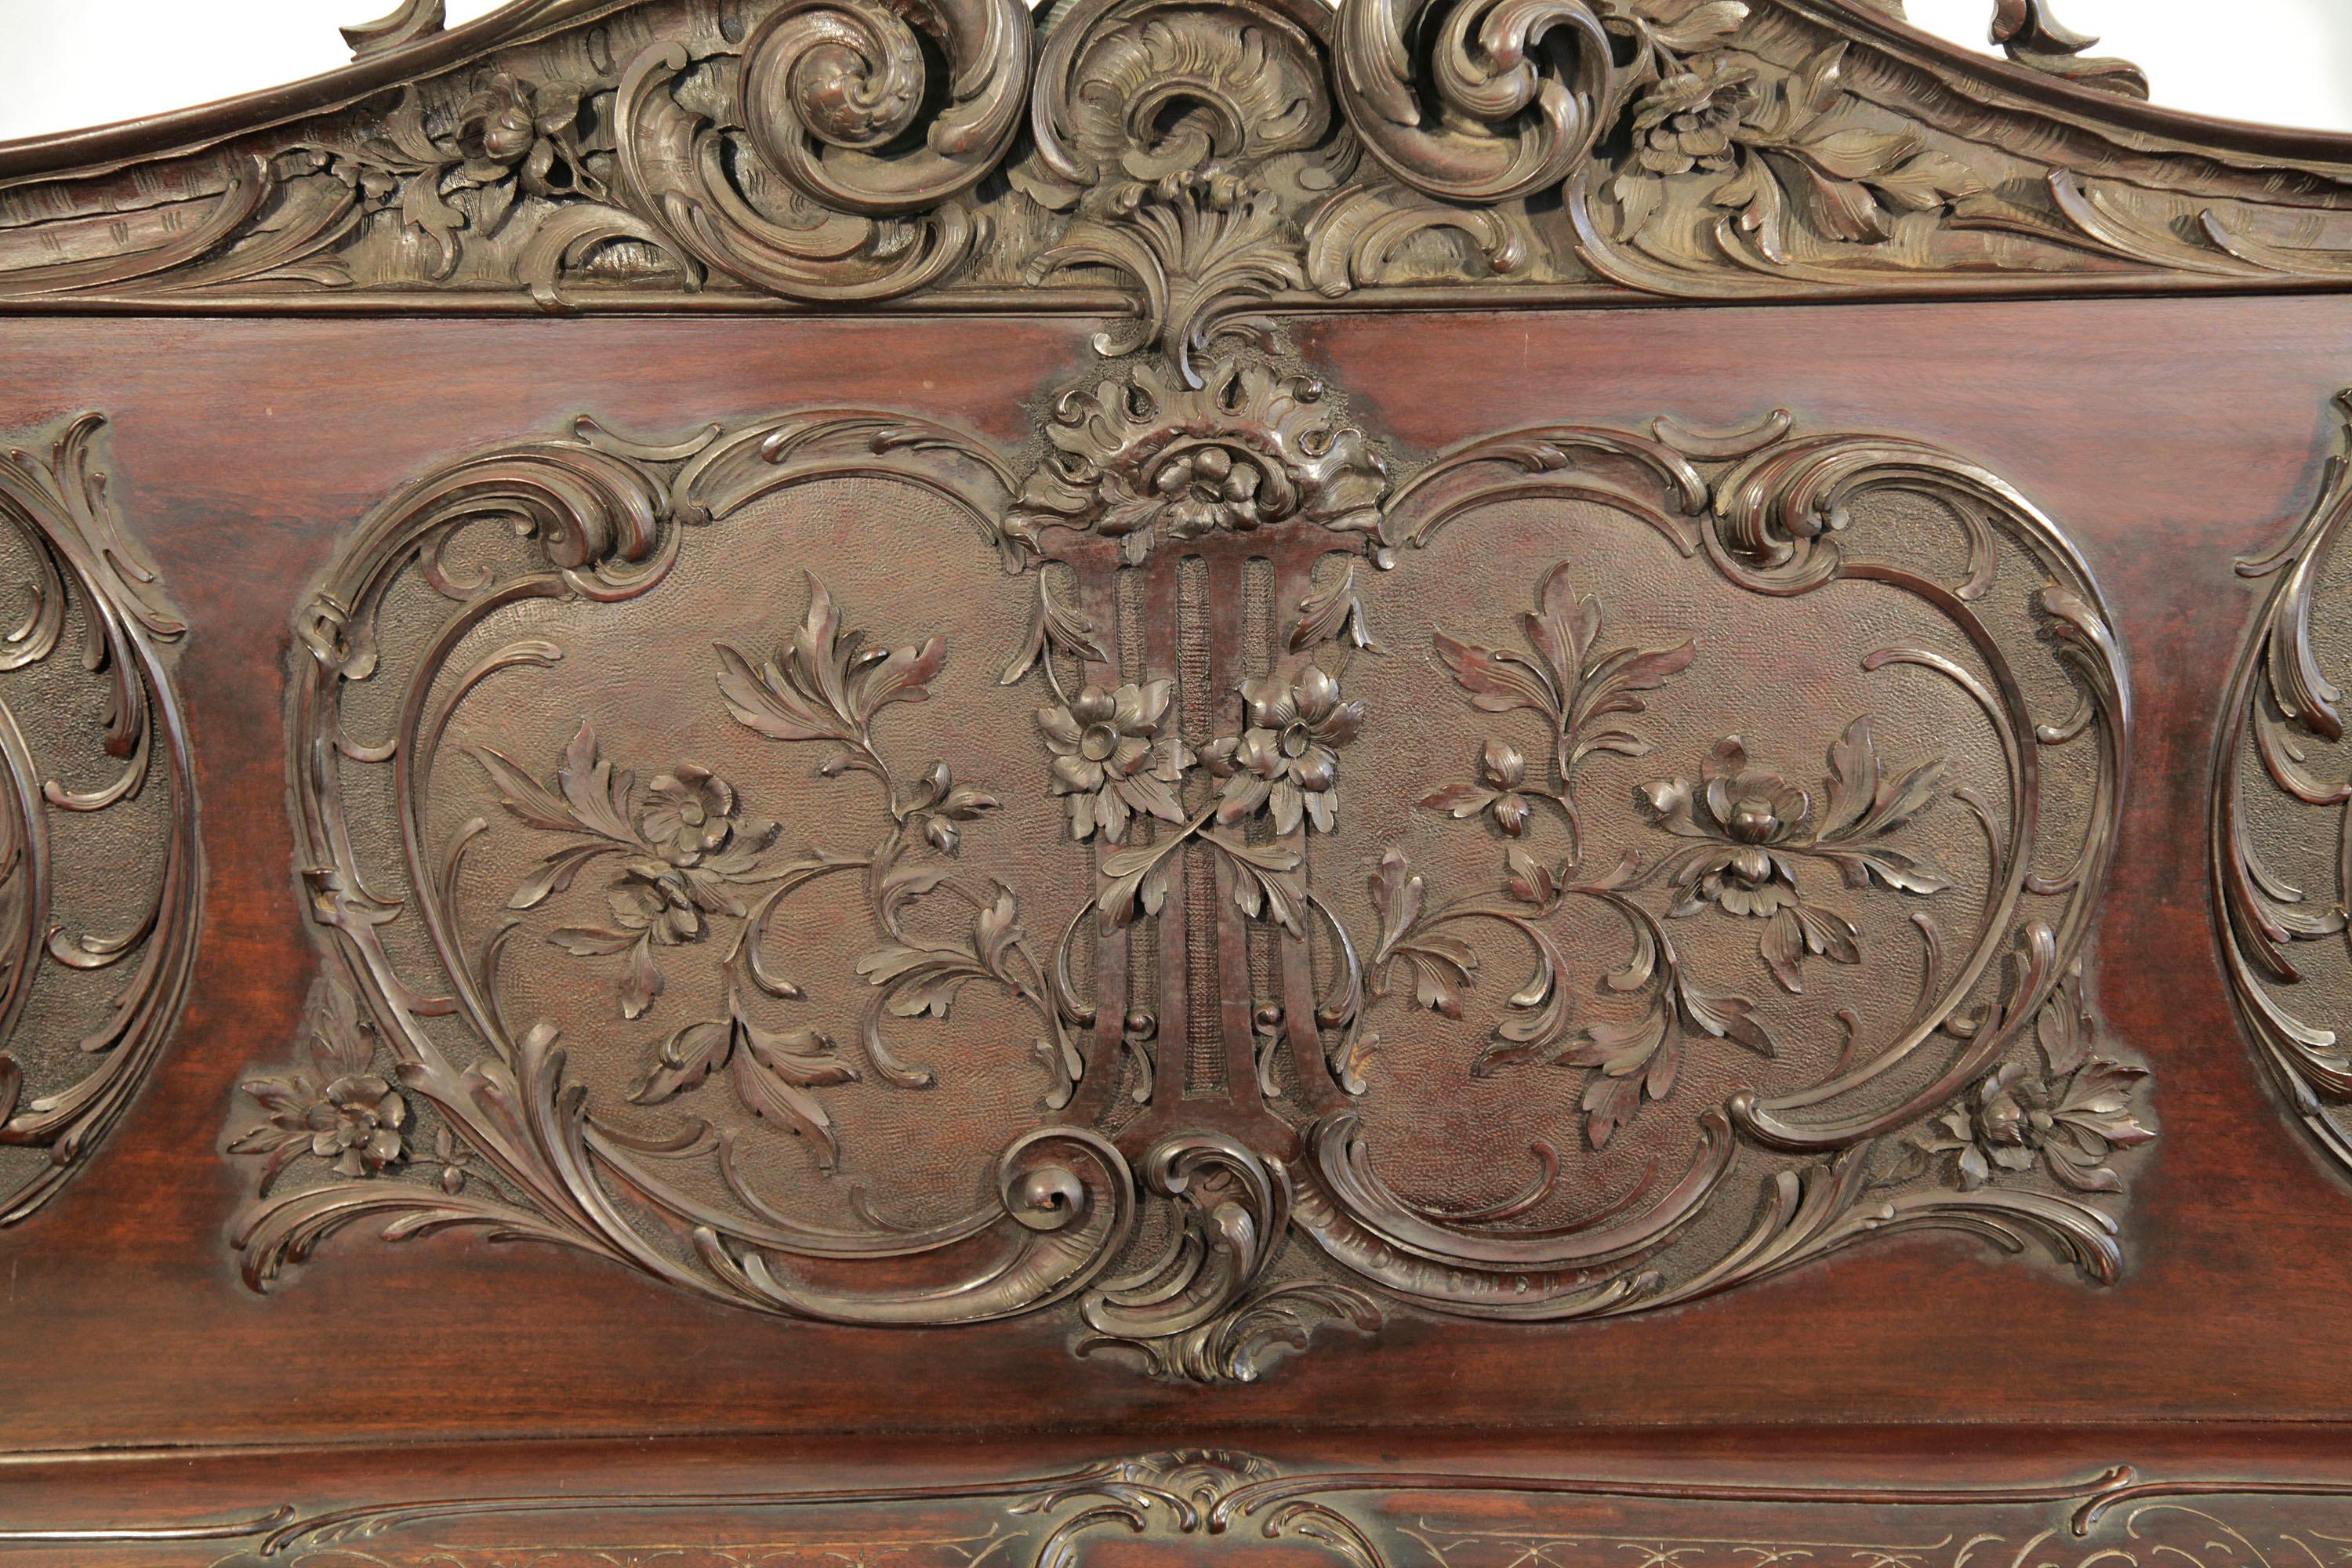 Francke upright piano with a mahogany case. Entire cabinet features Rococo style, ornate carvings in high relief.
The carved, front panel features a central lyre surrounded by flowers, foliage and acanthus. The piano fall has carved latticework and